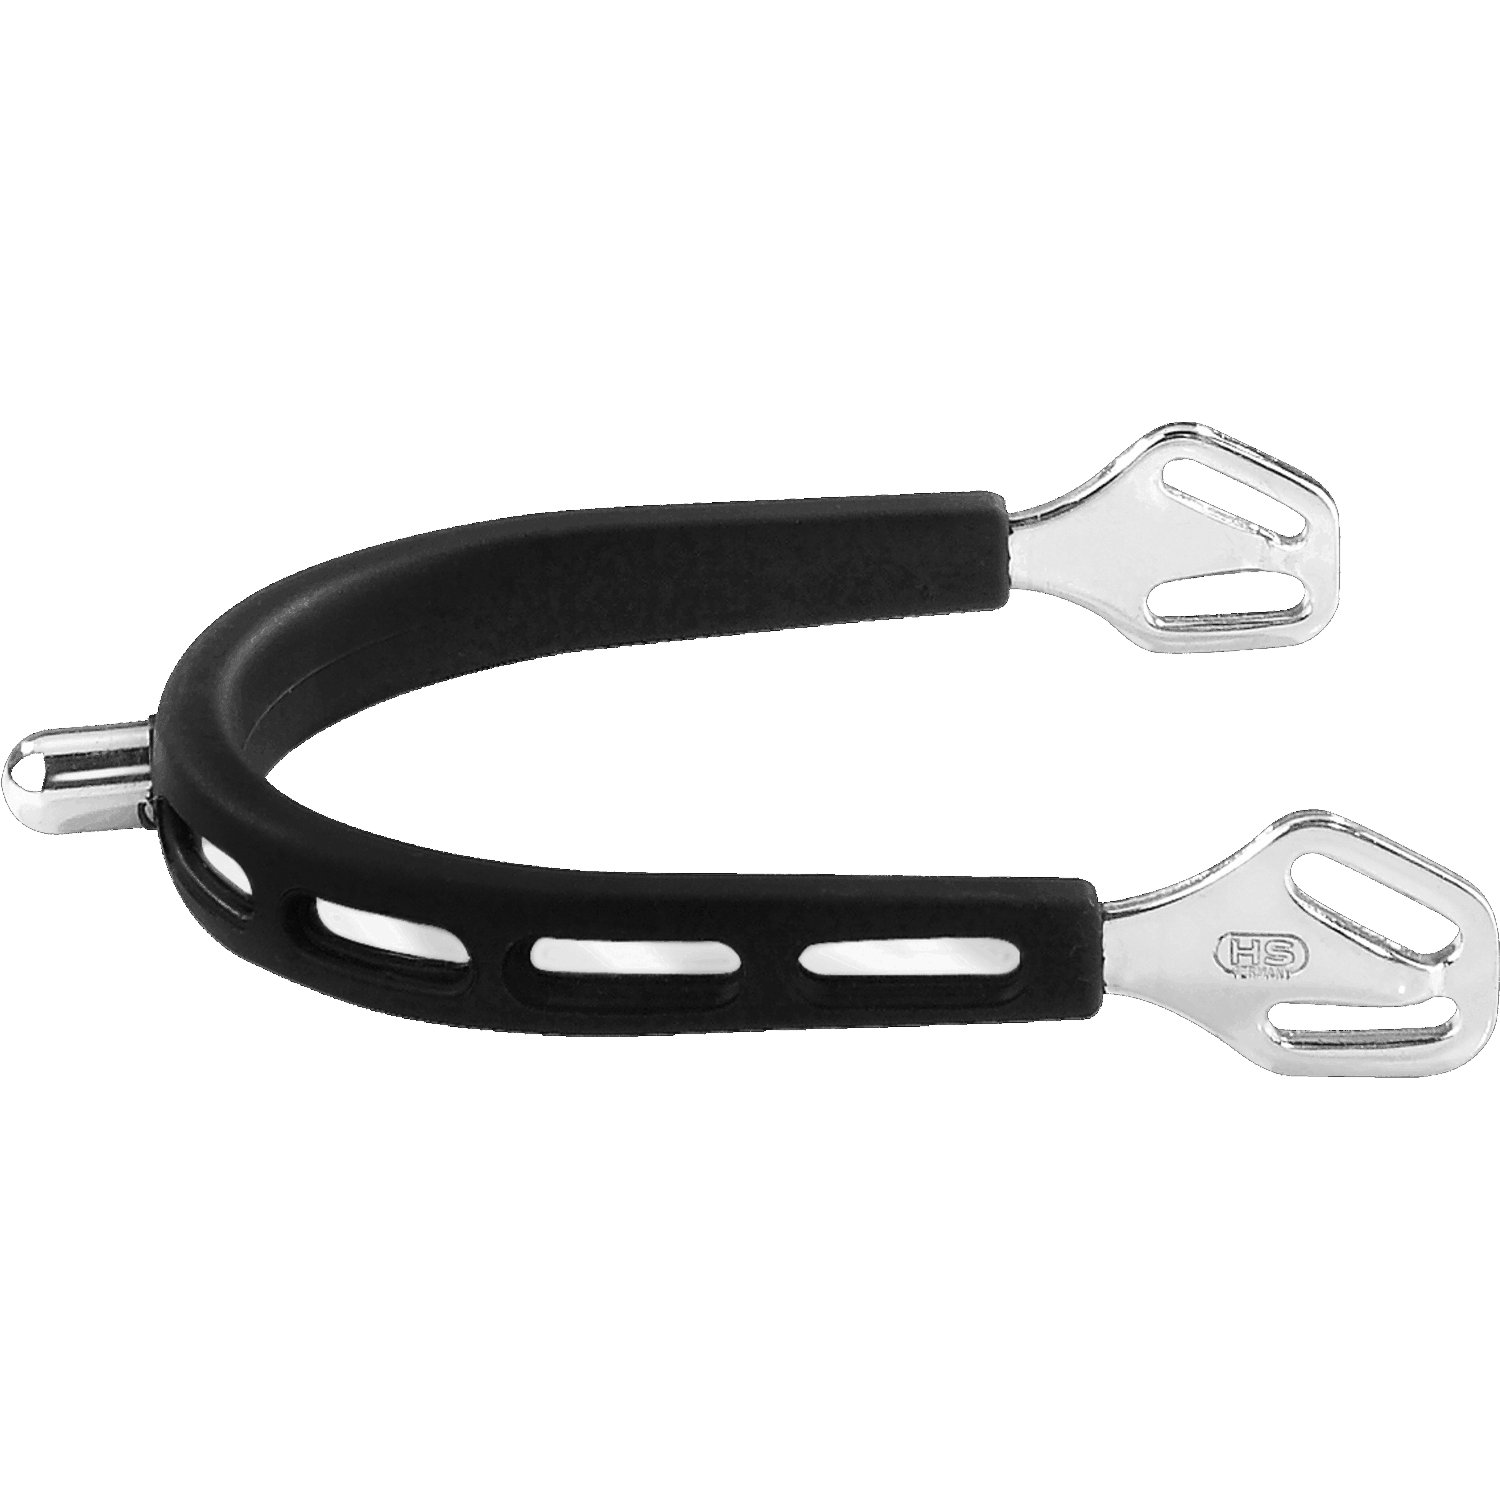 ULTRA Fit Extra Grip Spurs with Balkenhol Fastening - Short, Rounded, Neck End